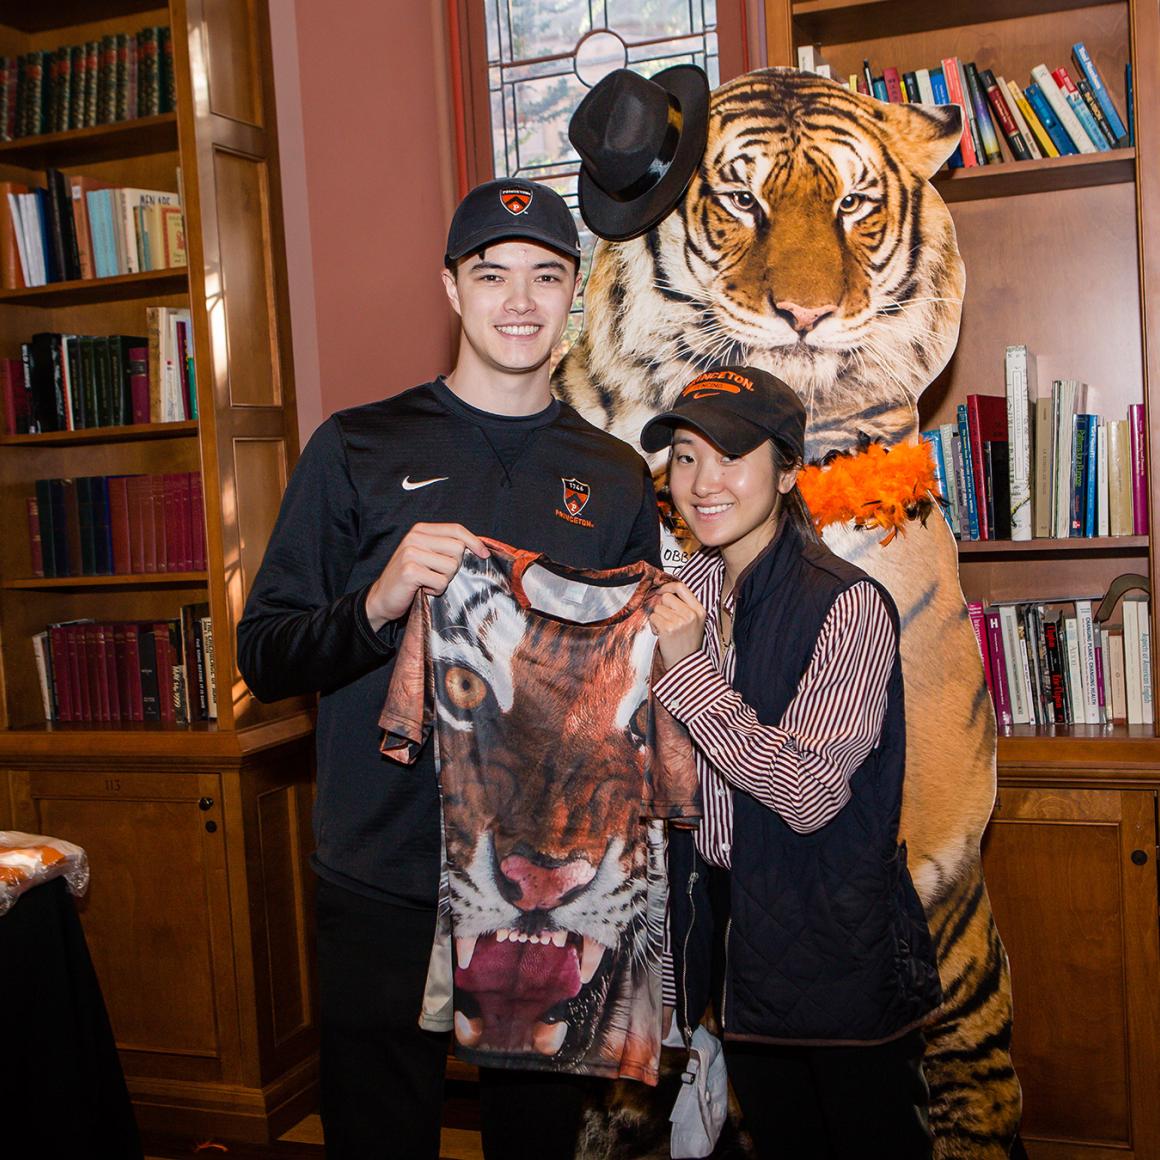 Two alumni show their favorite Princeton gear at the 2022 ROAR event